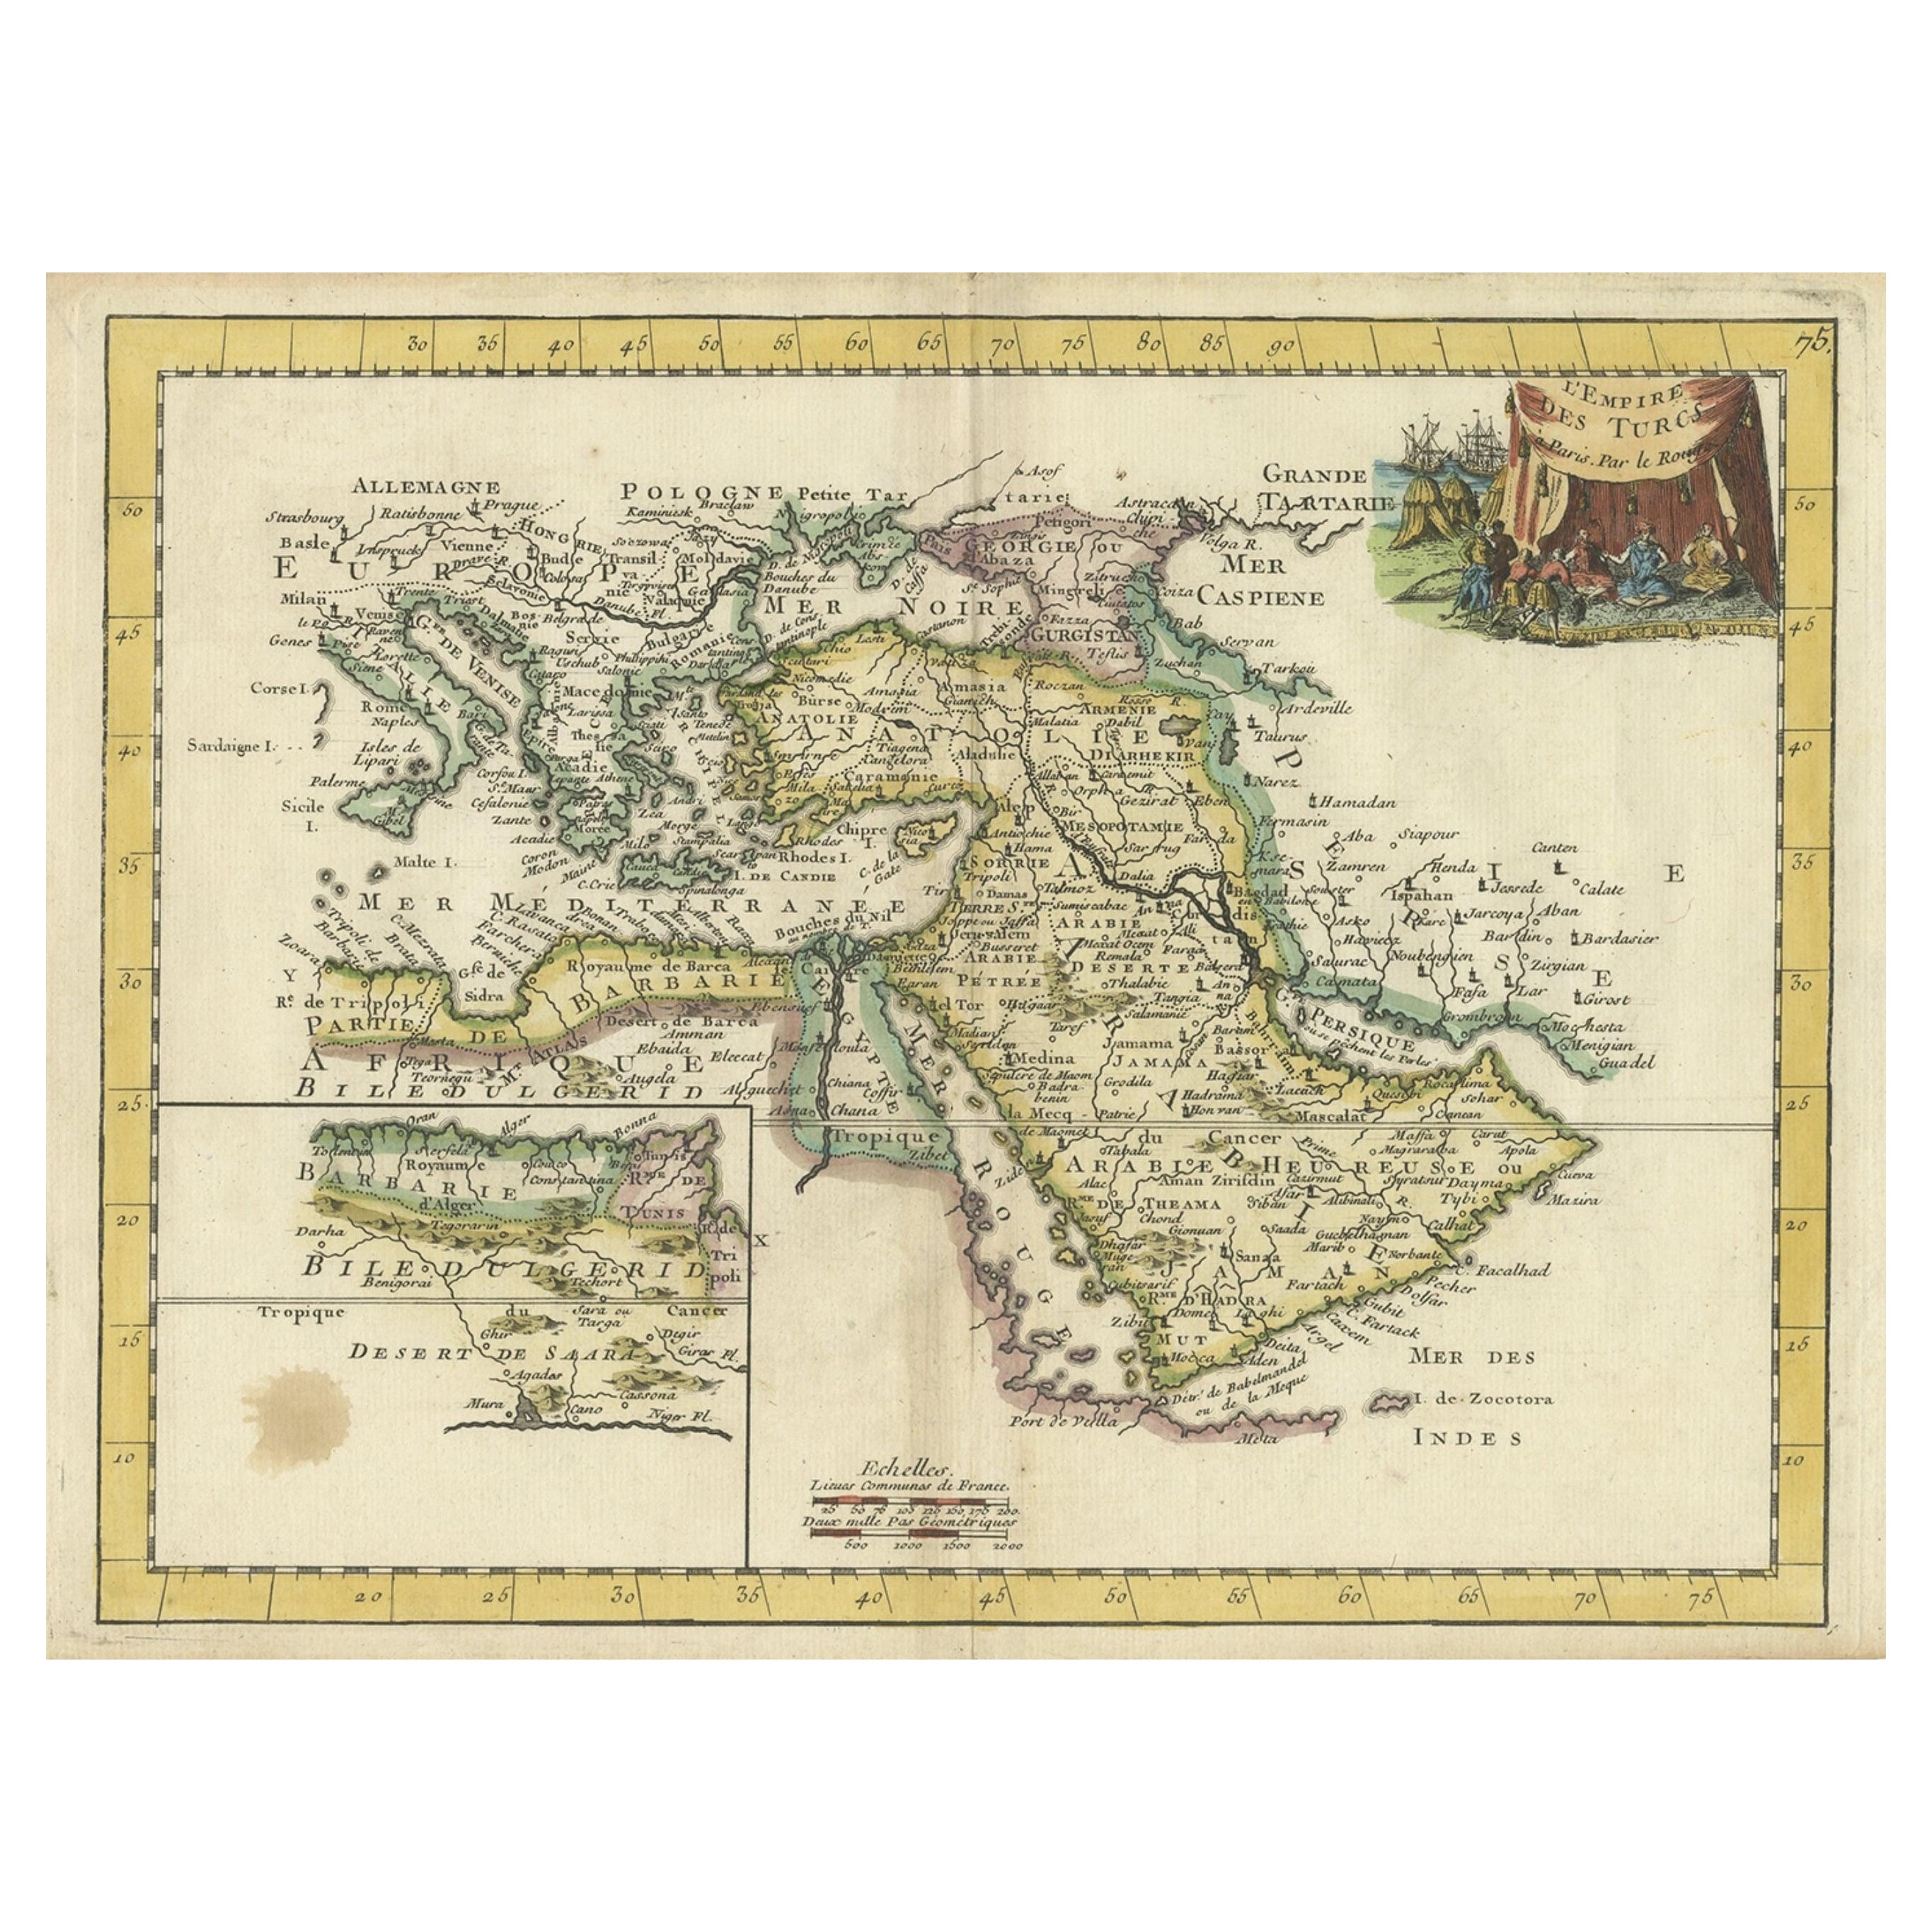 Orginal Antique Handcolored Map of the Turkish Empire, 1748